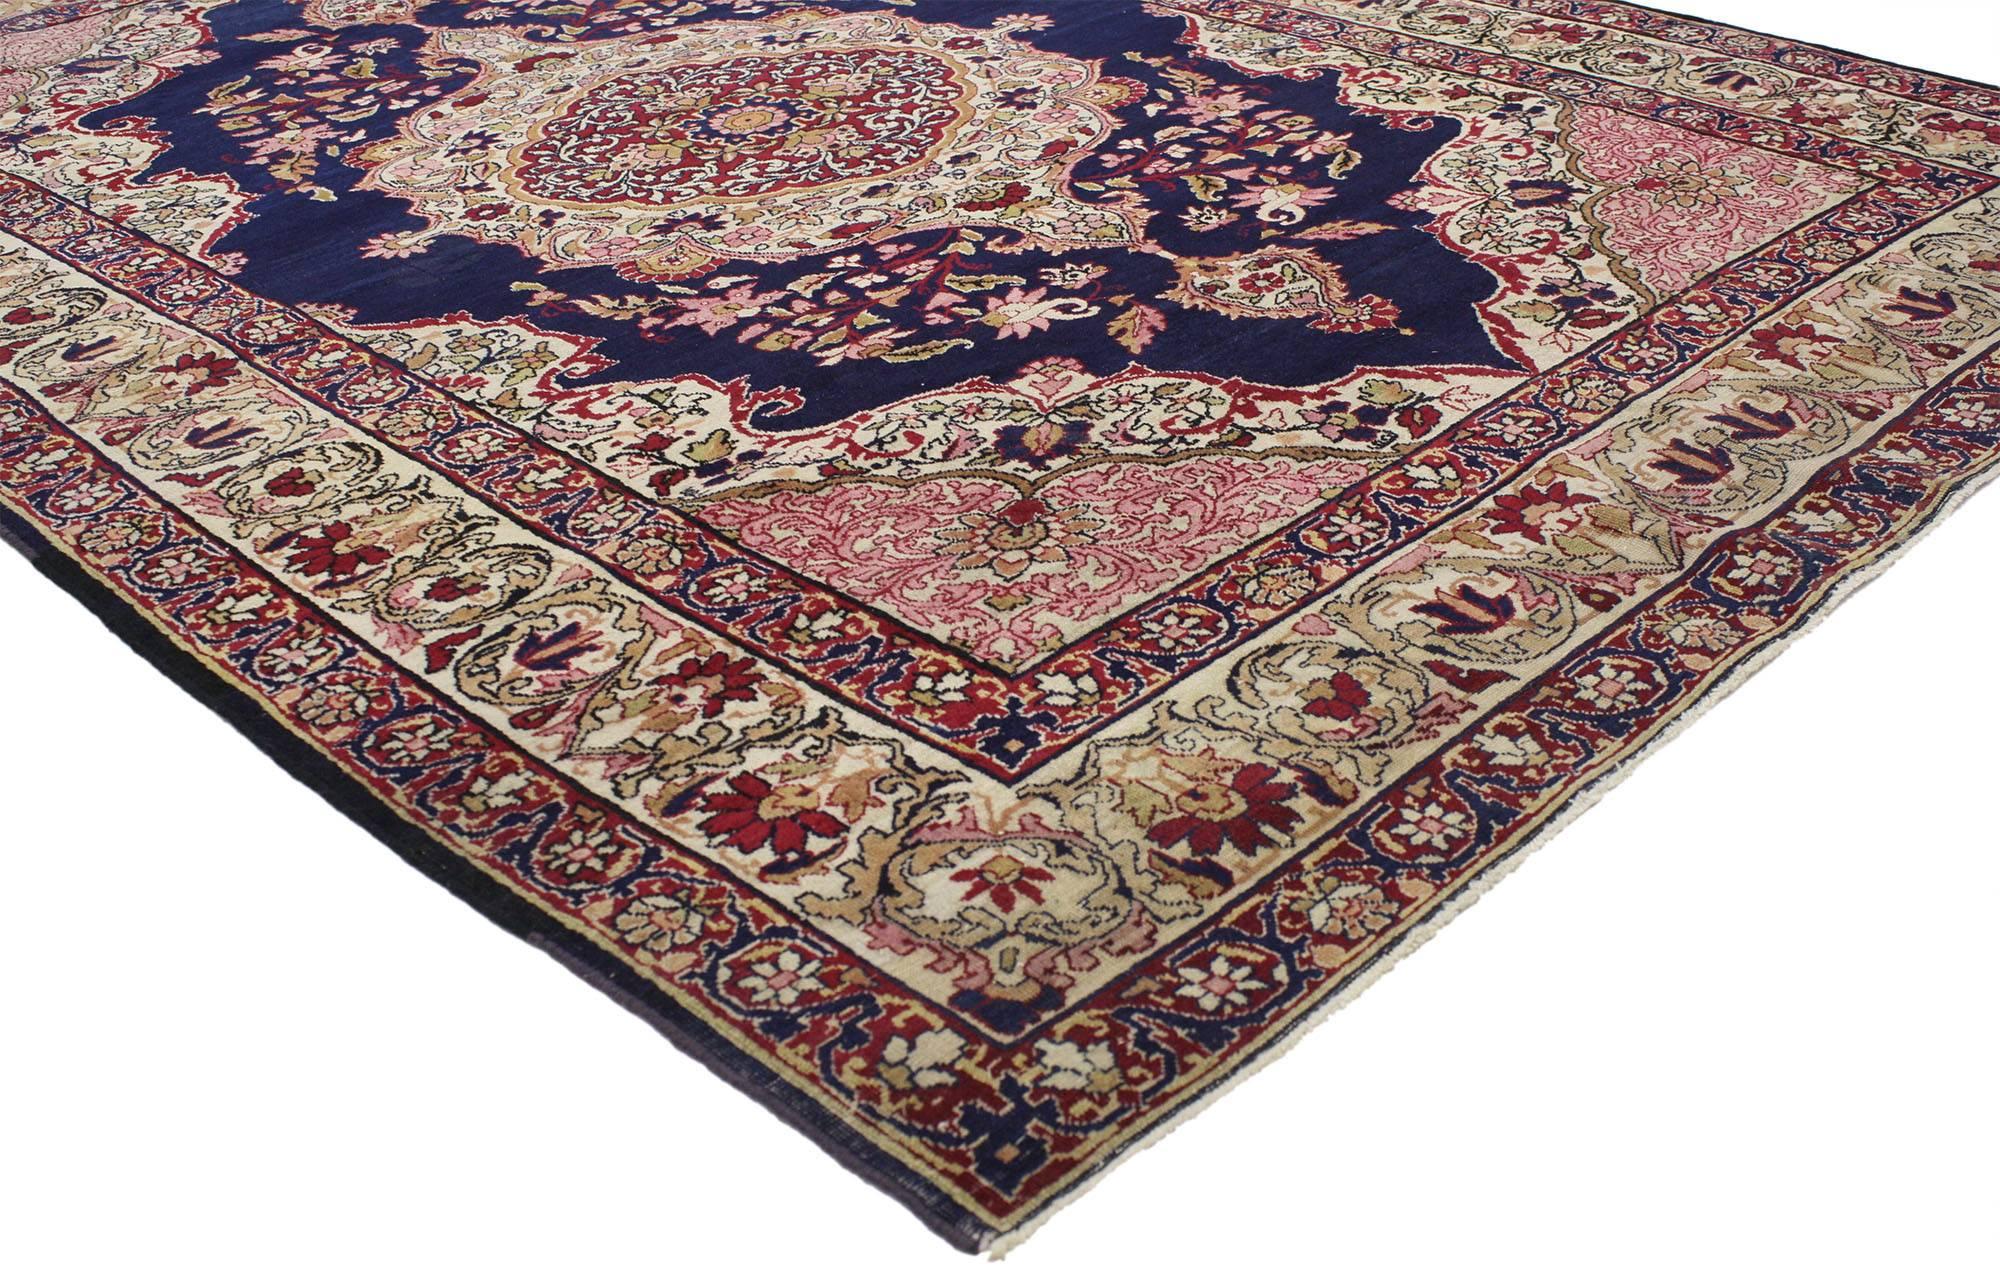 77023 Antique Persian Kermanshah Rug with Traditional Style 04'07 x 06'09. Rich in color with beguiling beauty, this hand knotted wool antique Persian Kermanshah rug is poised to impress. It features a central curvilinear floral medallion on a sea